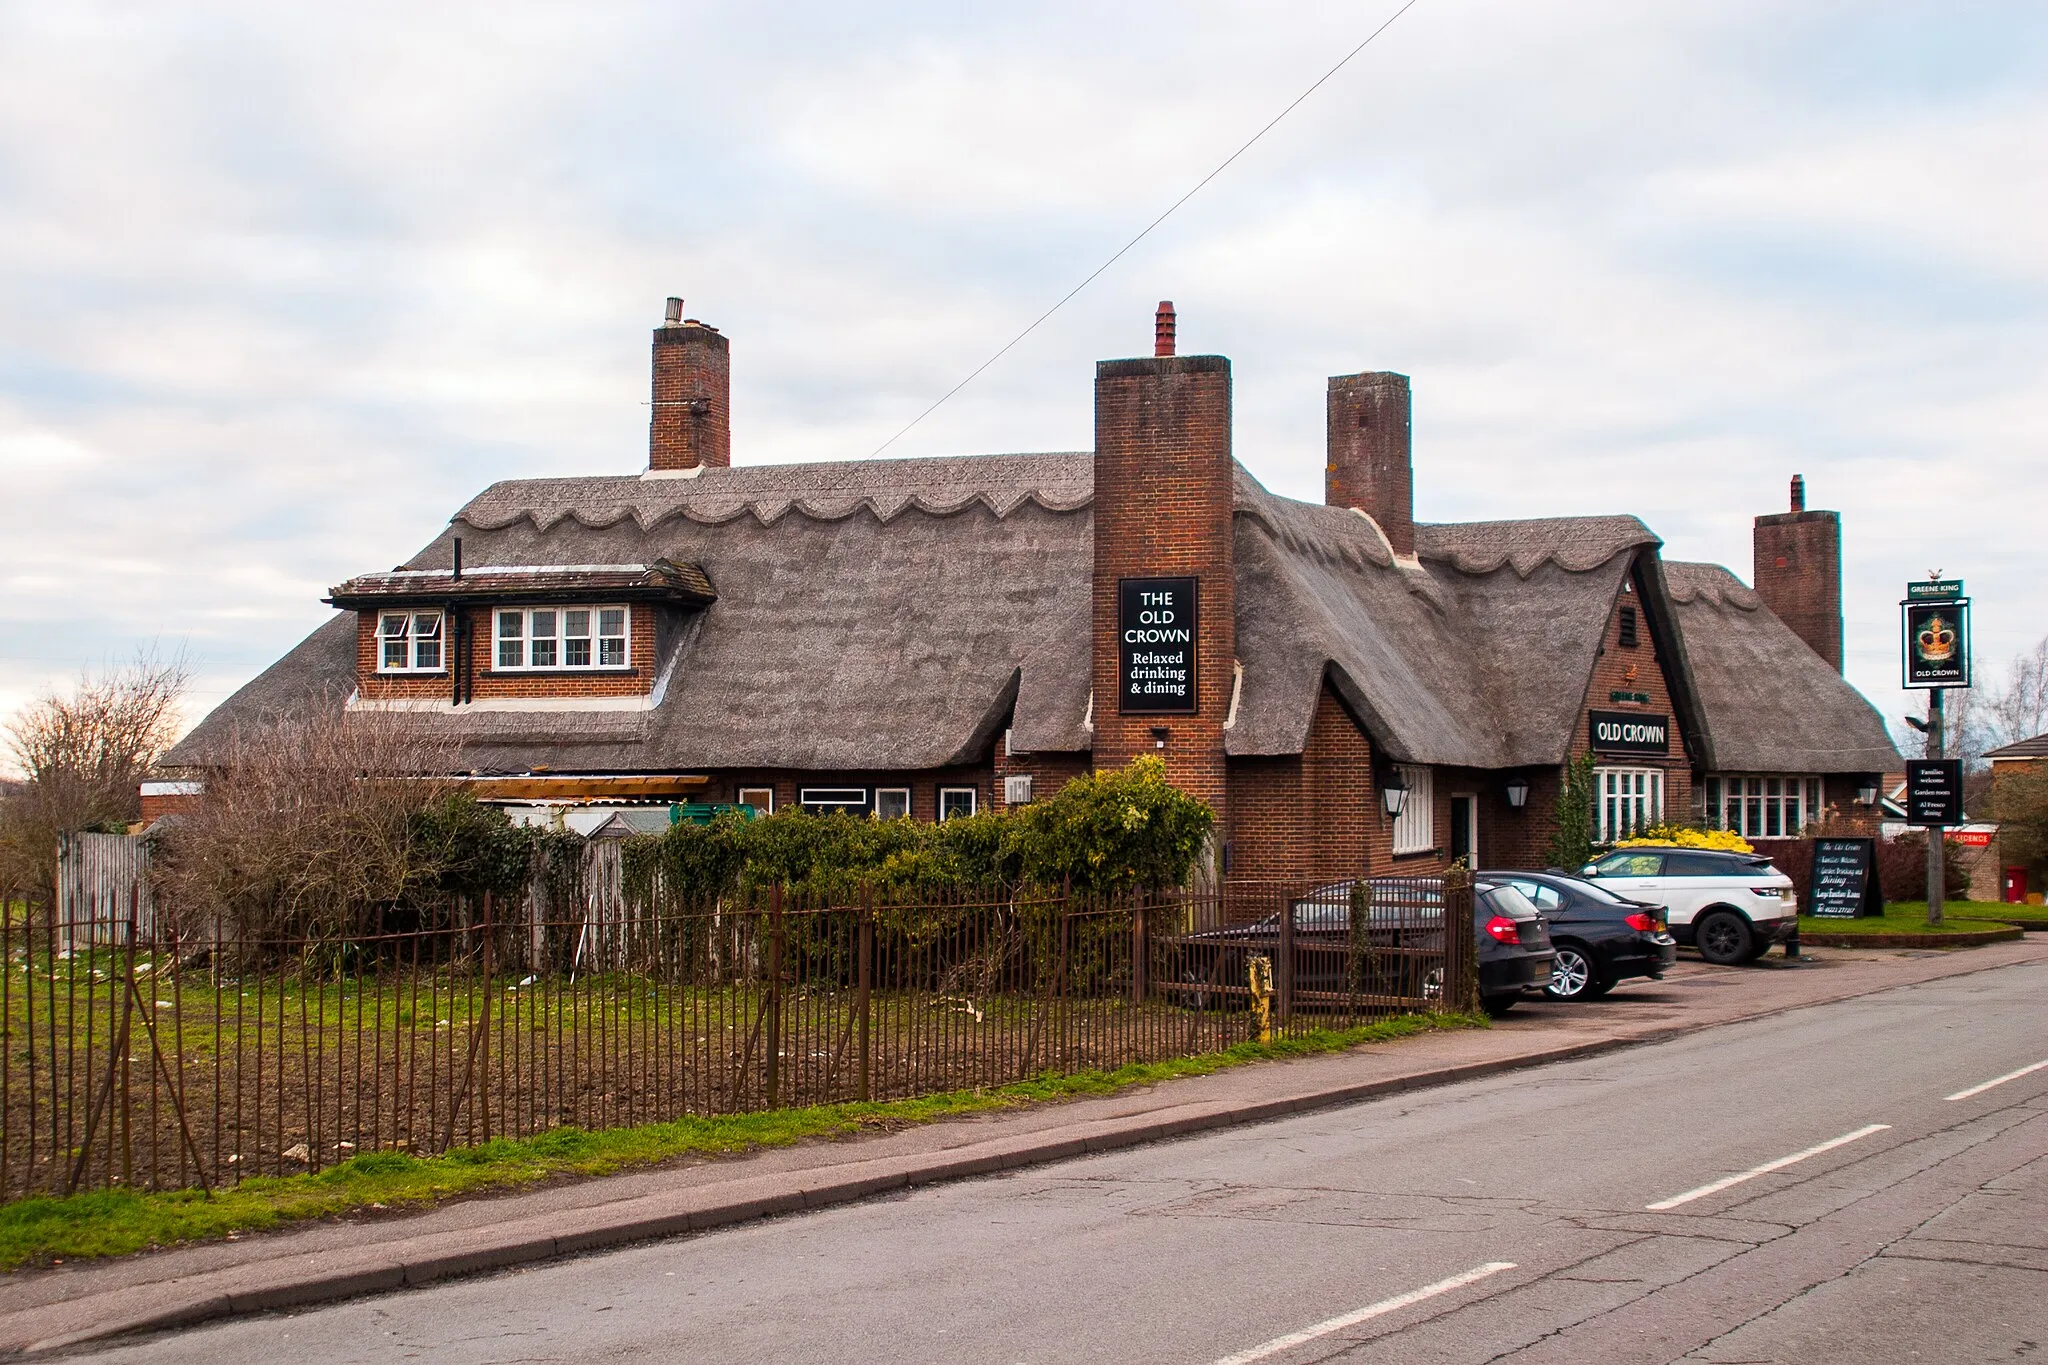 Photo showing: A photo of The Old Crown, one of the two current pubs in Girton, on the corner of High Street and Dodford Lane